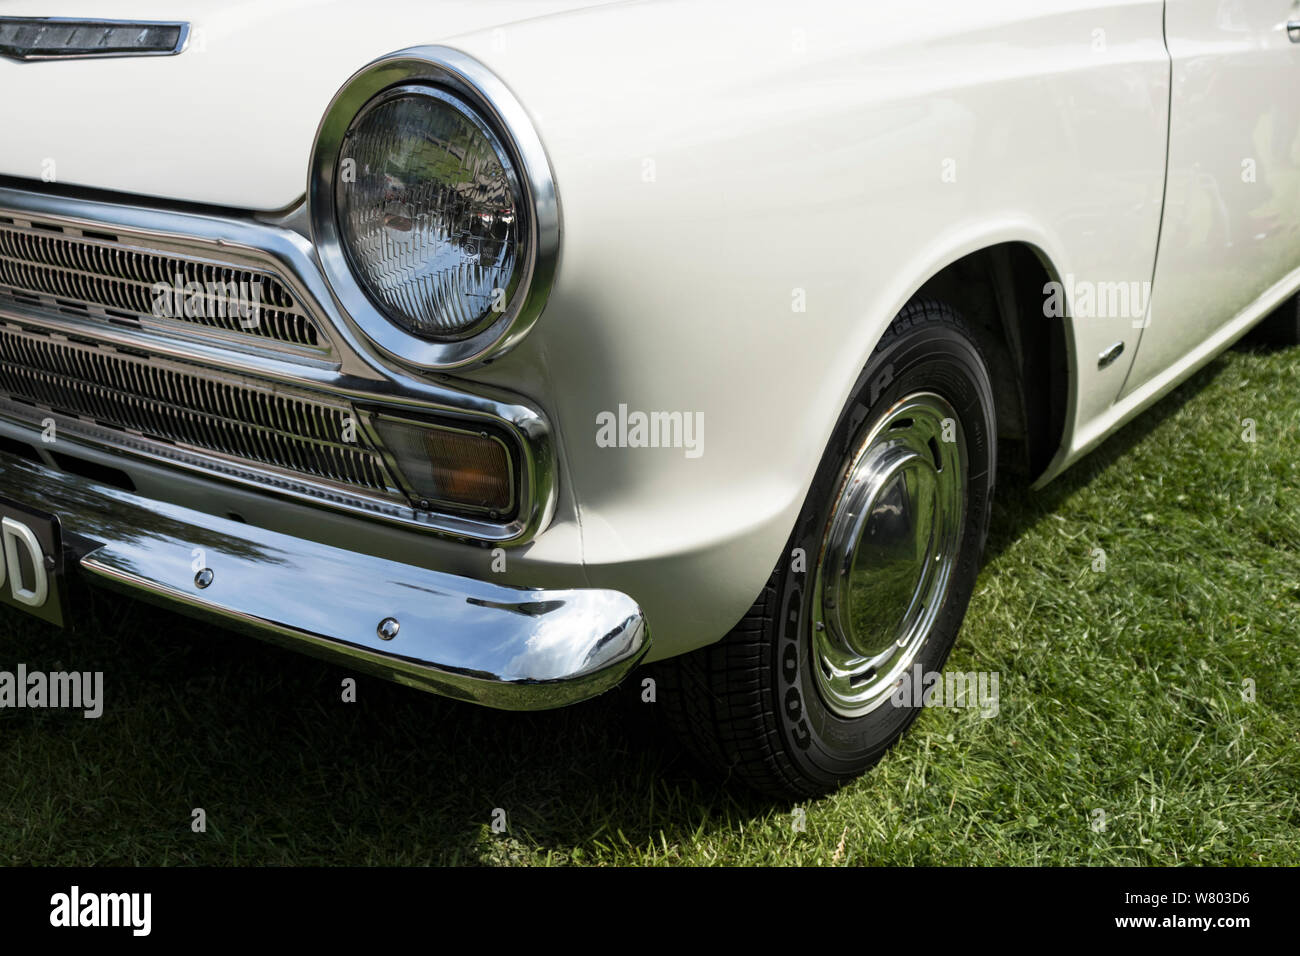 Ford Cortina Mark 1 front wing Stock Photo - Alamy